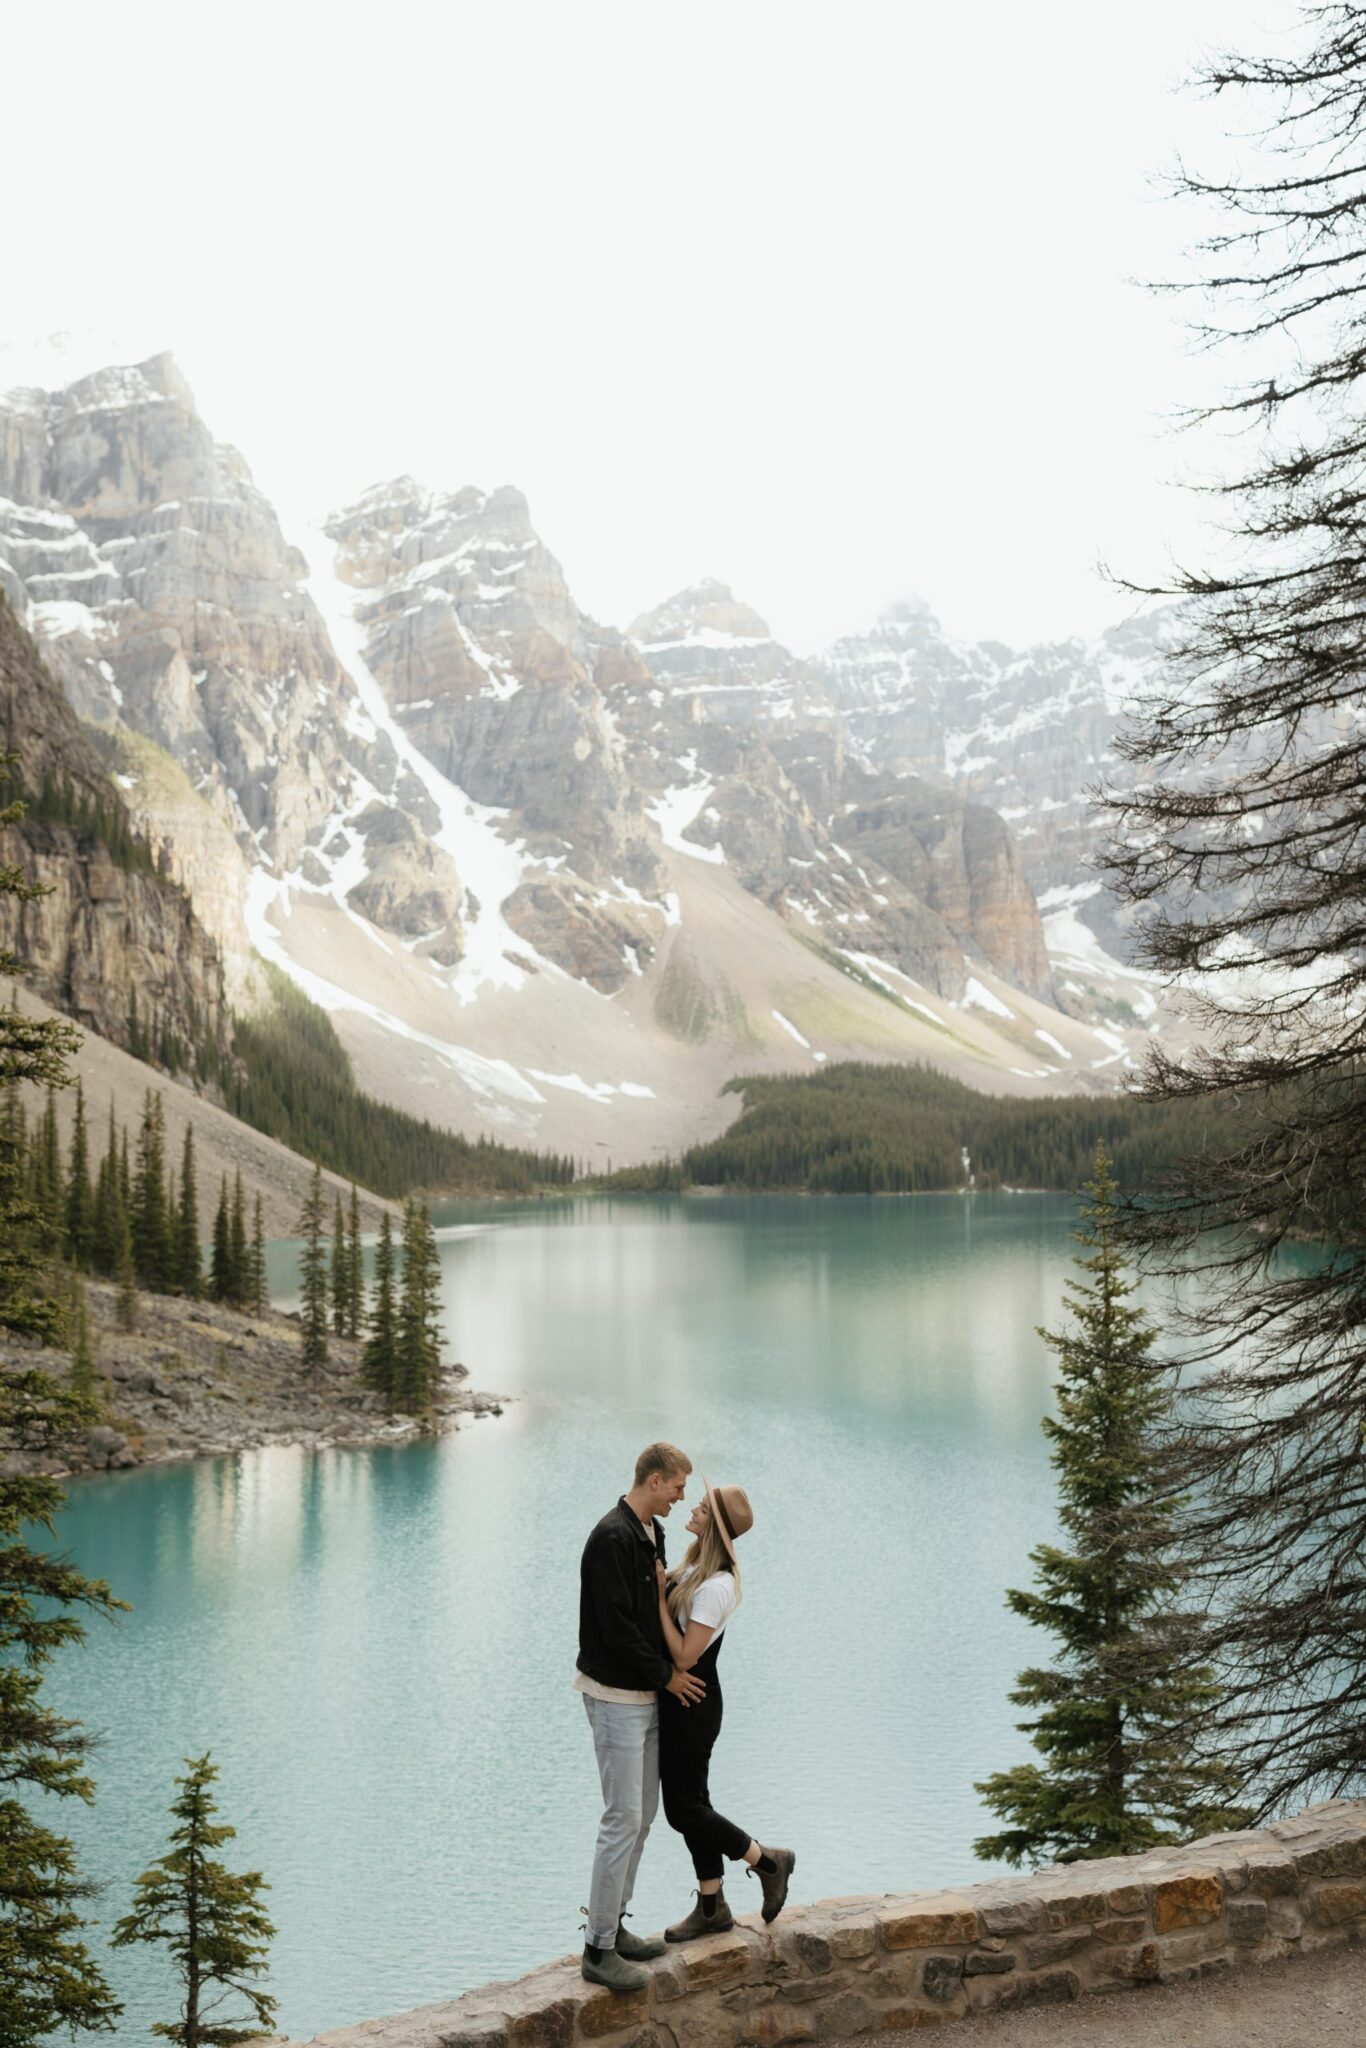 Engagement session outfit tips from wedding professional, Malorie Reiter